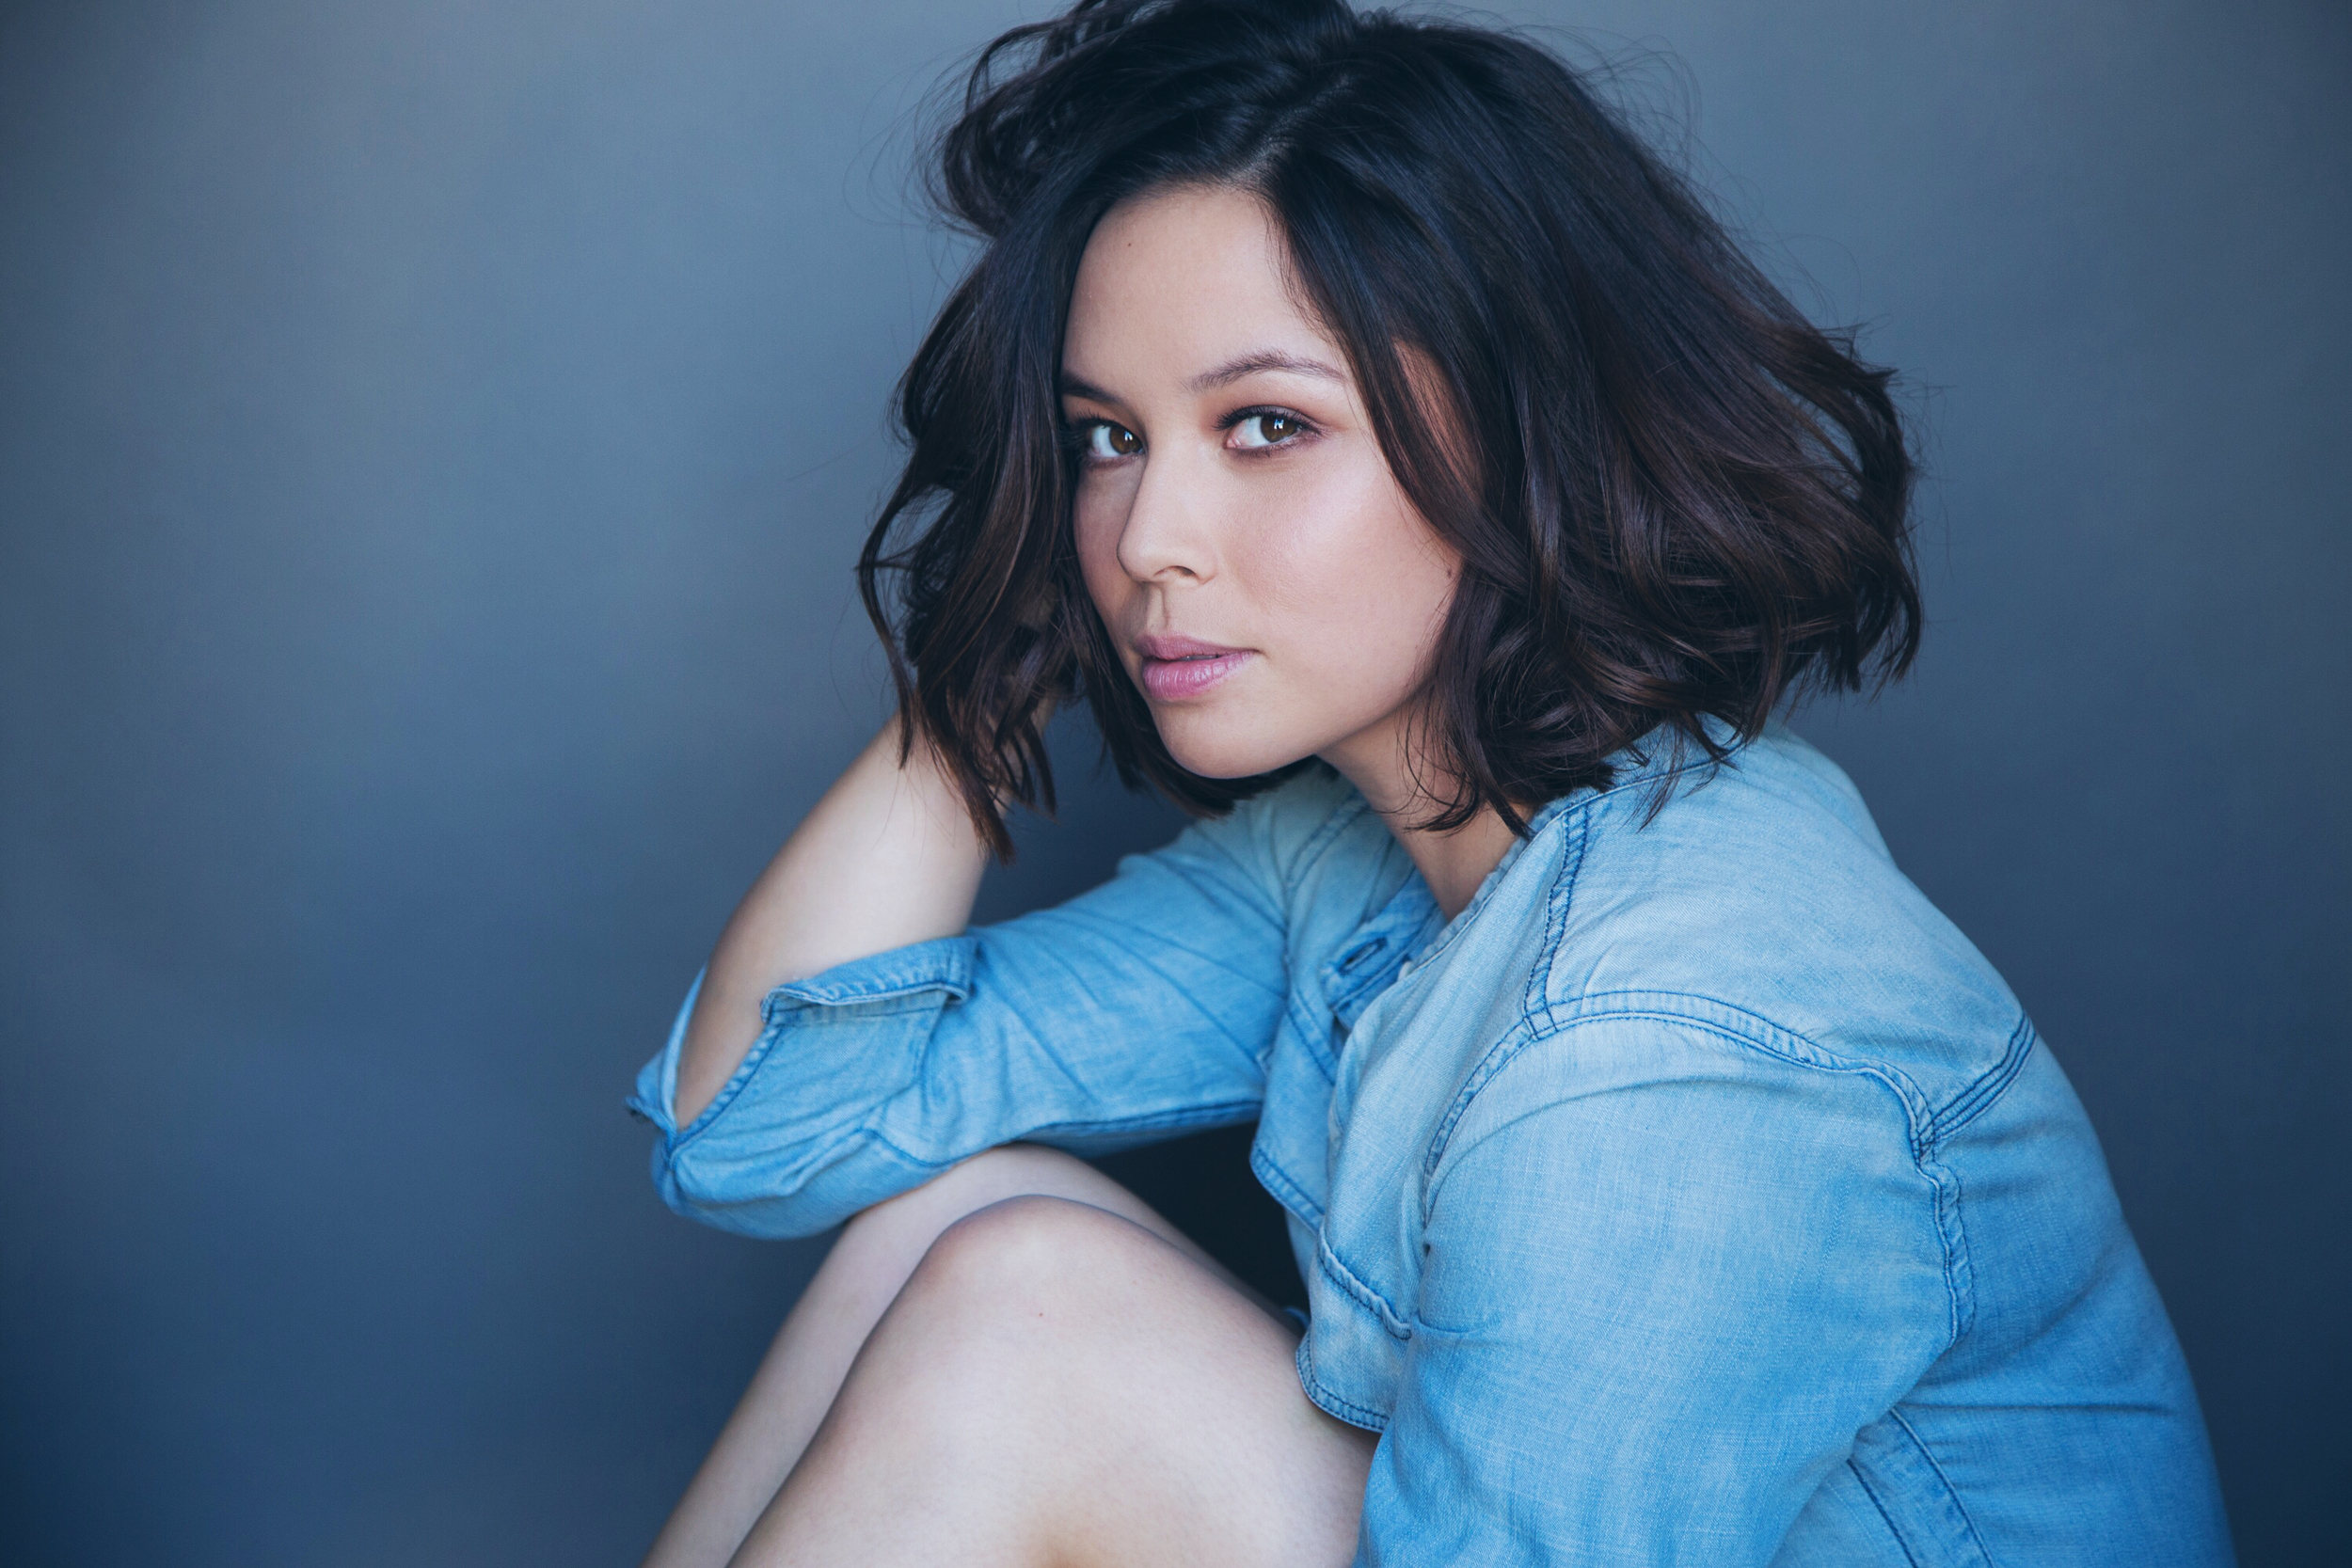 Støv Afslut Urskive Find Out What Gives Malese Jow That Healthy Glow and How She Balances Life  While Working on the Hit Show 'The Flash' — Wisdom in Beauty